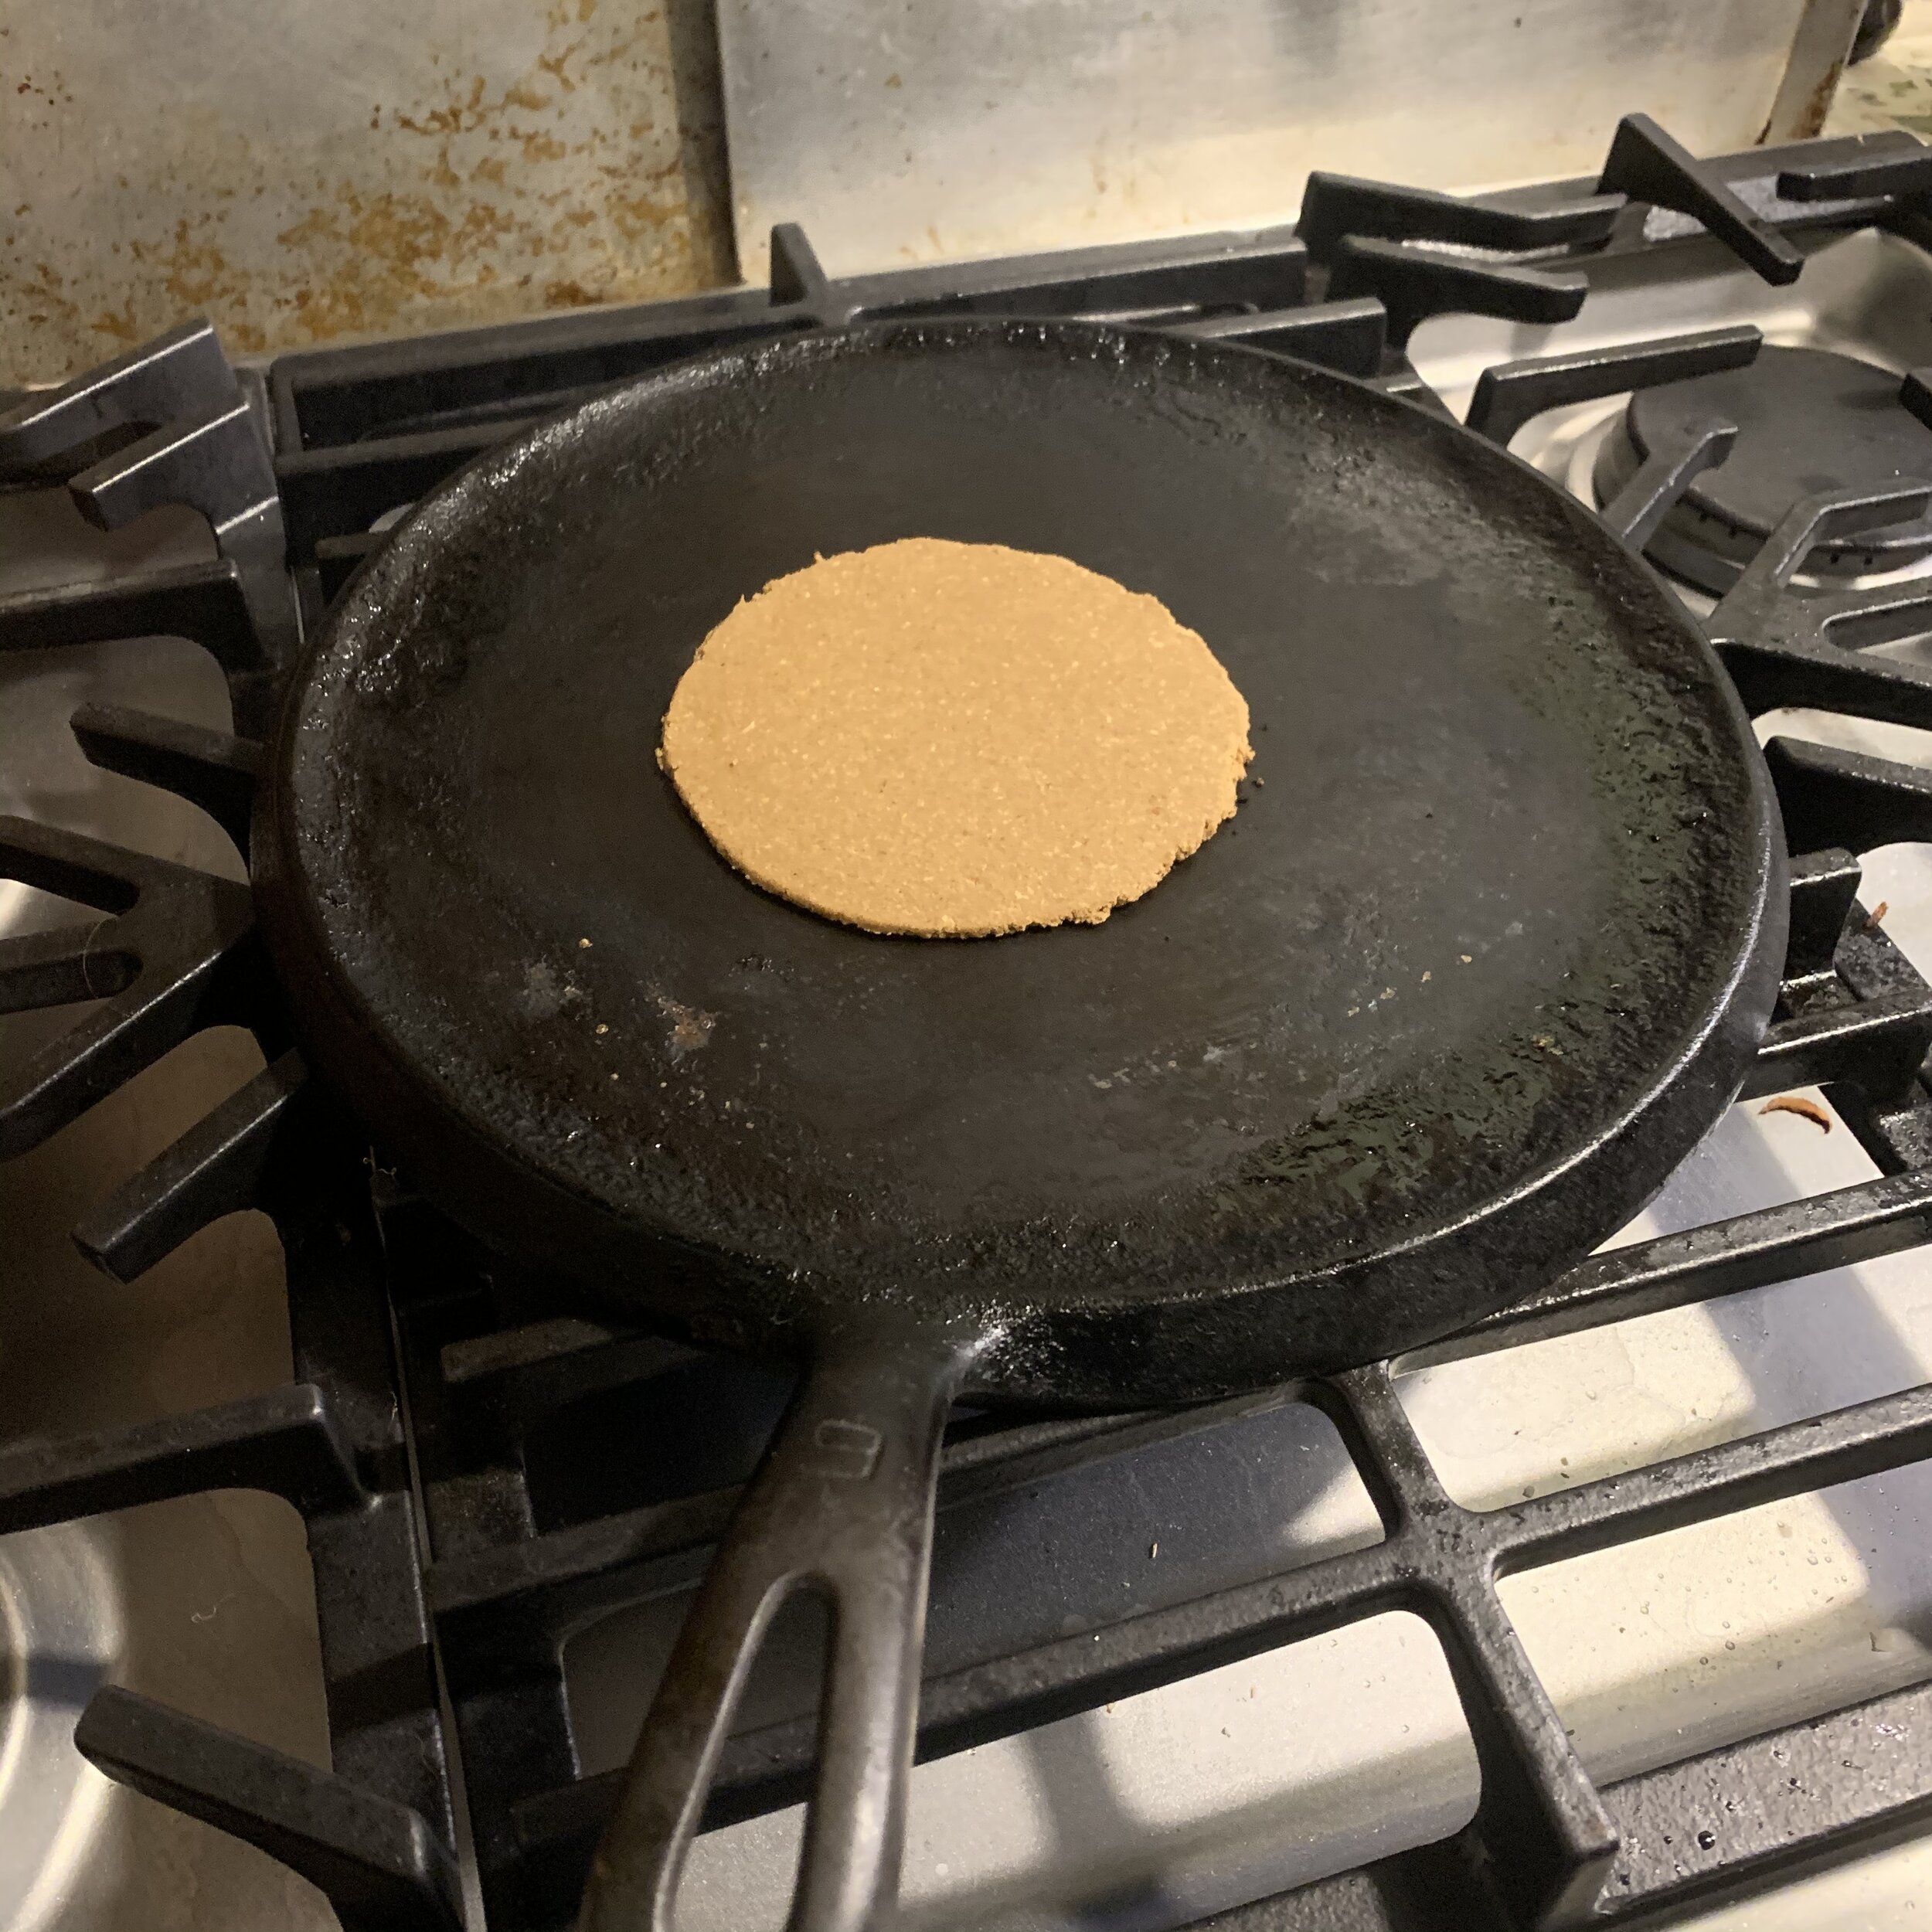 press into shape &amp; cook on a hot dry skillet